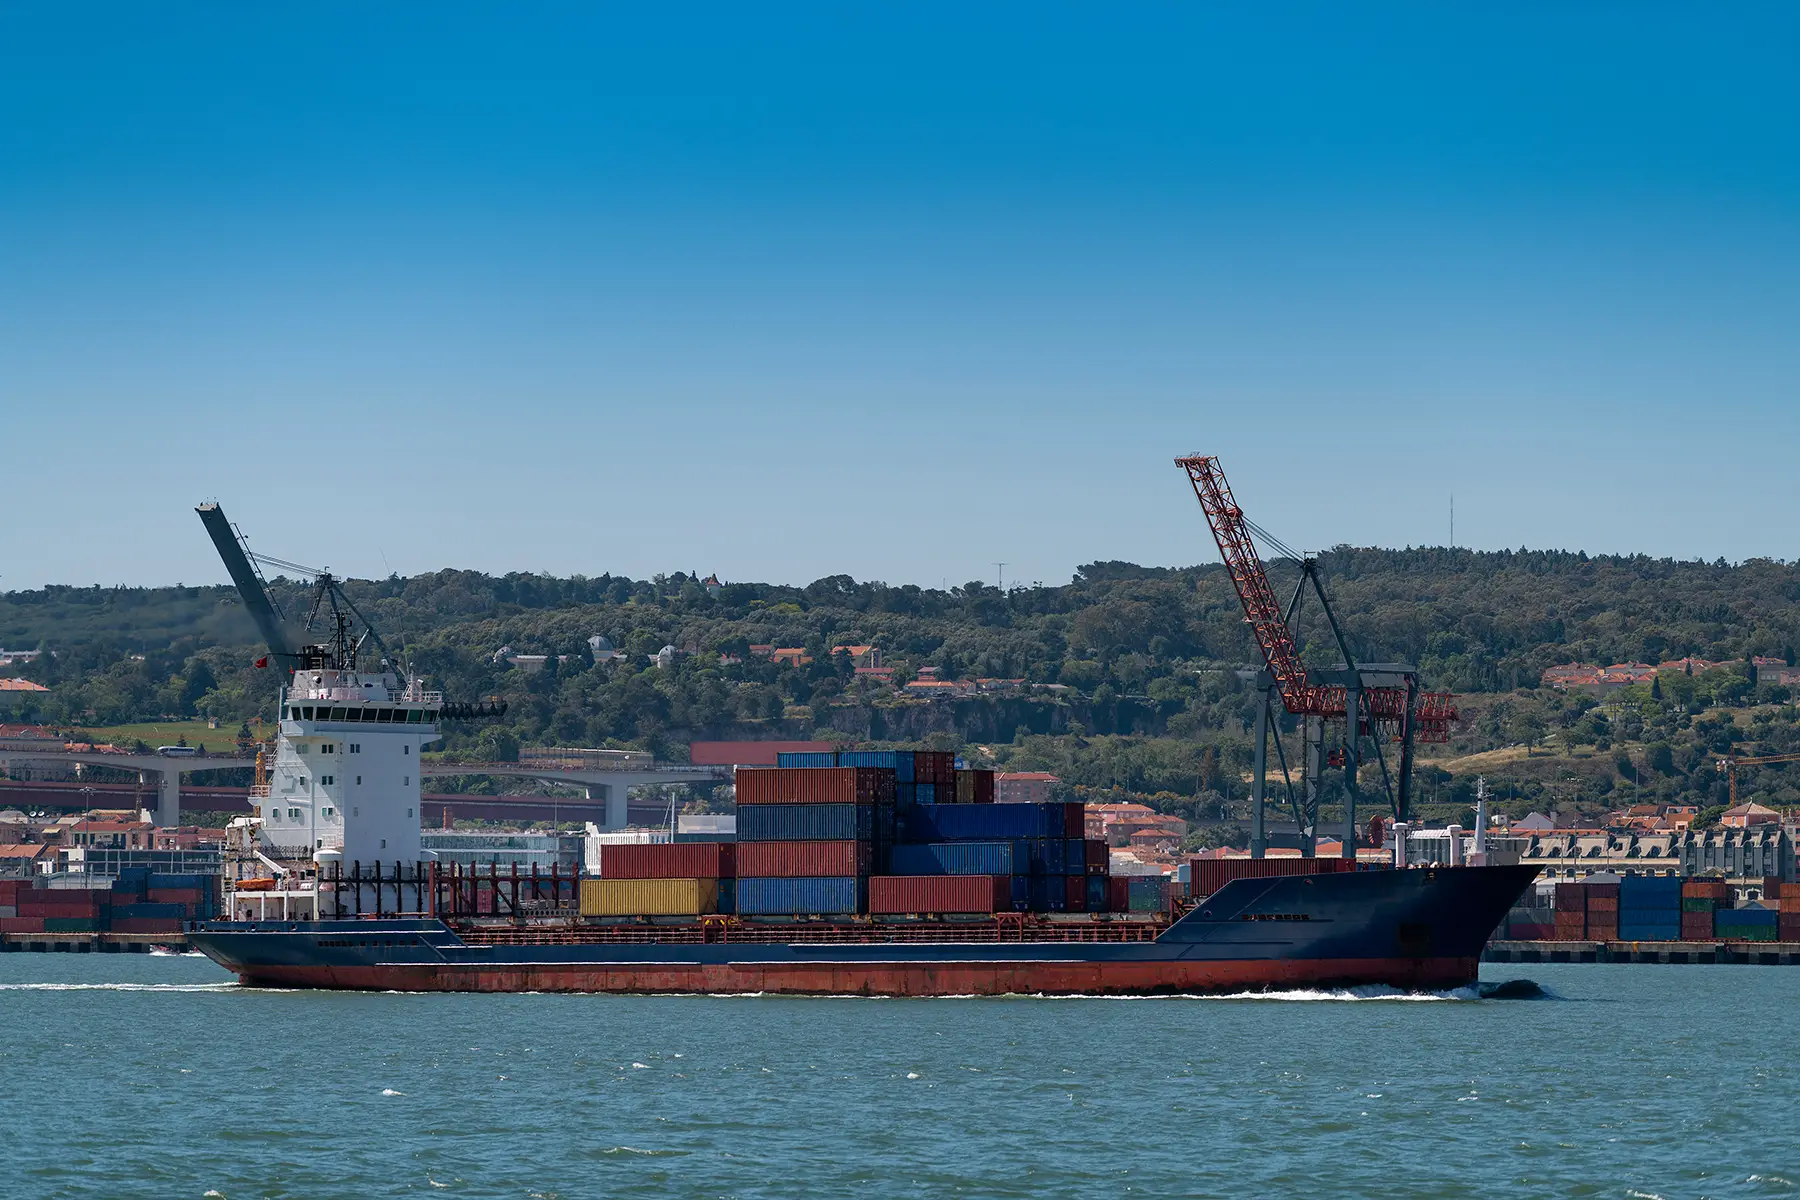 Removals to Portugal: container ship near Lisbon